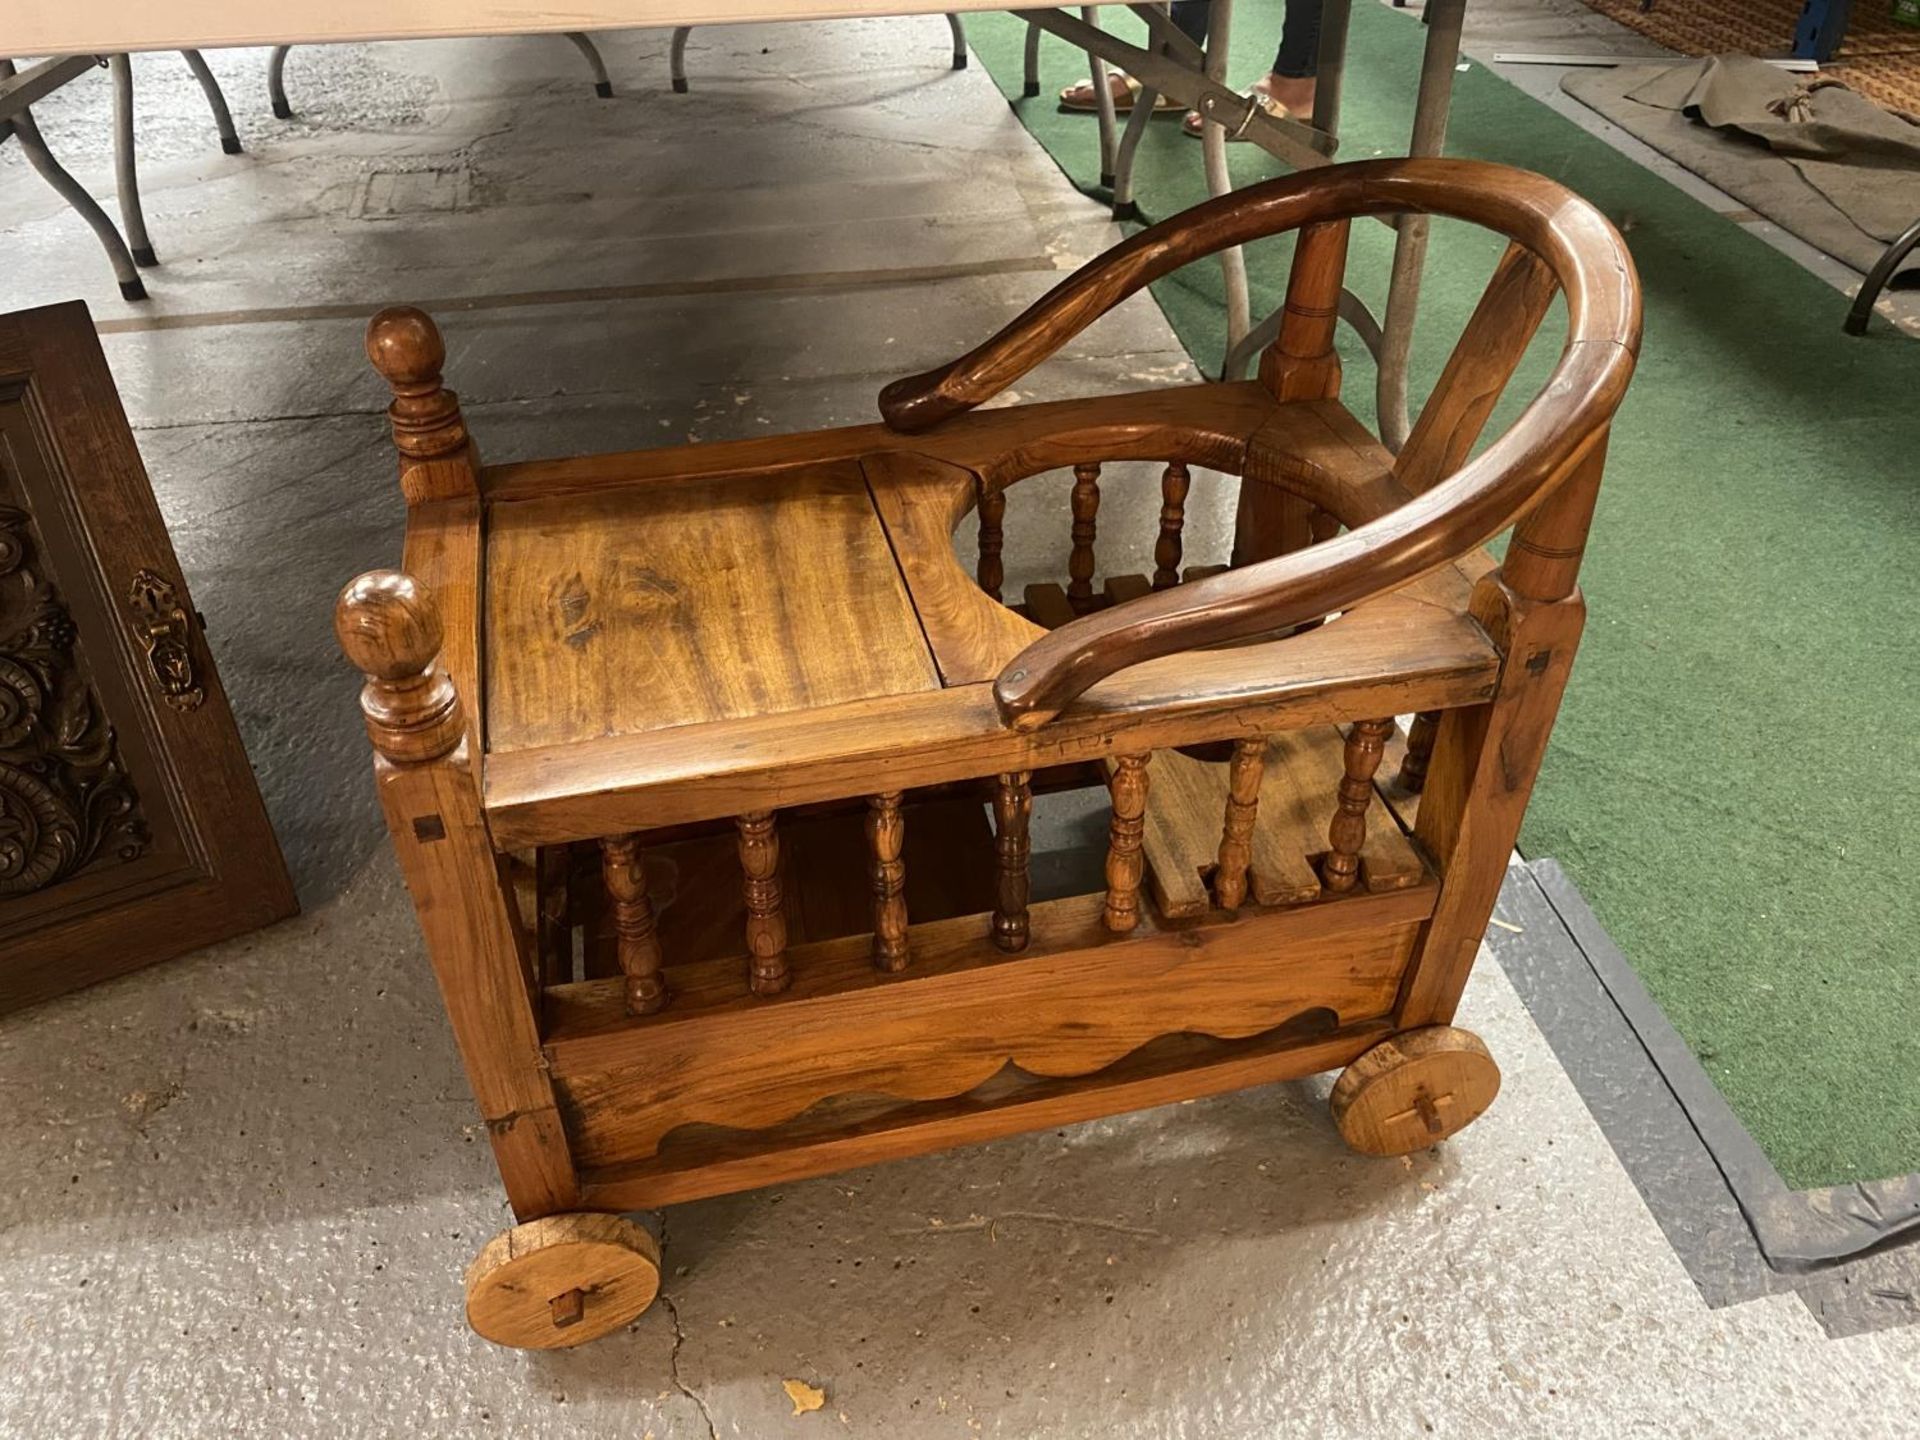 A EARLY MANCHURIAN HARDWOOD CHILD'S CHAIR - Image 2 of 4